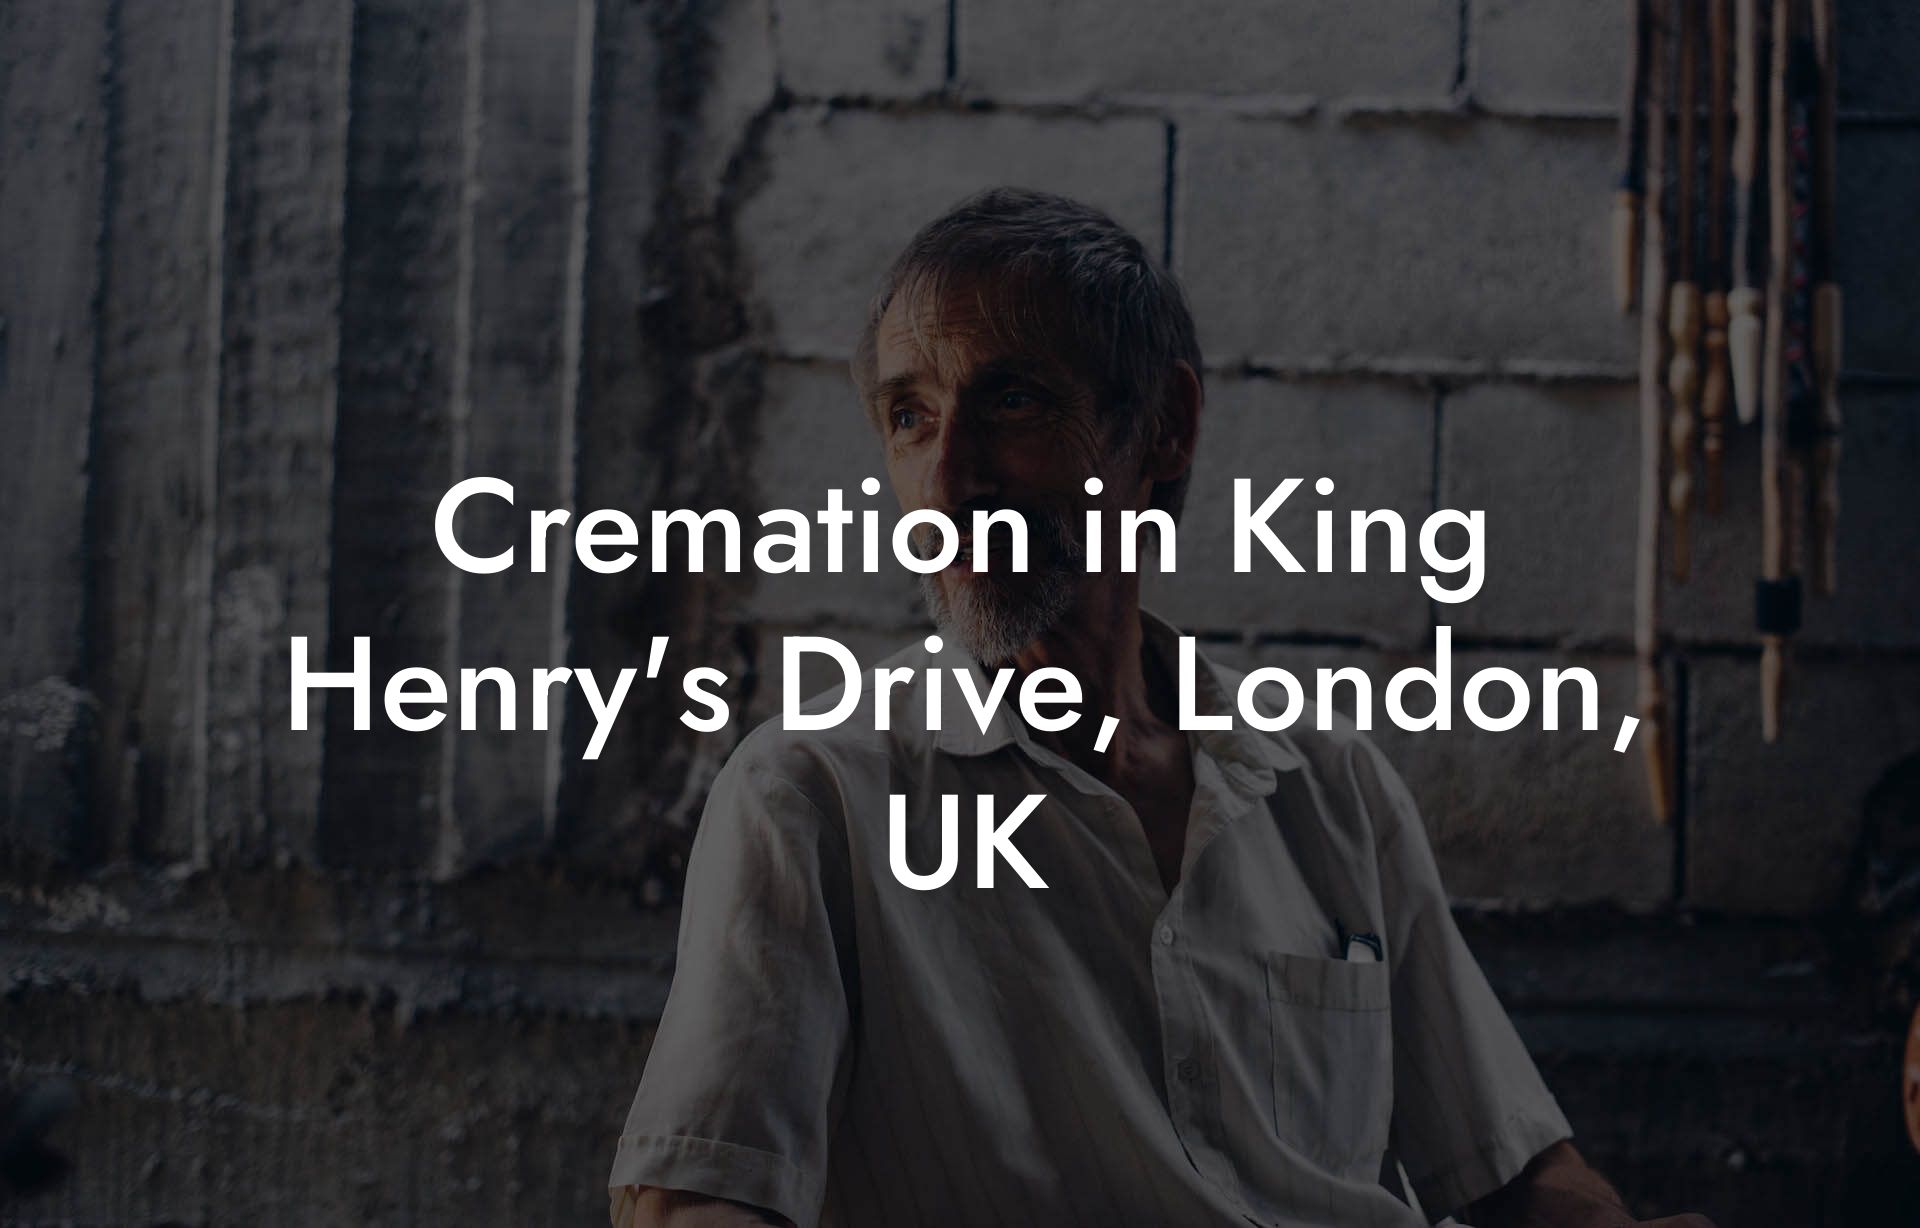 Cremation in King Henry's Drive, London, UK